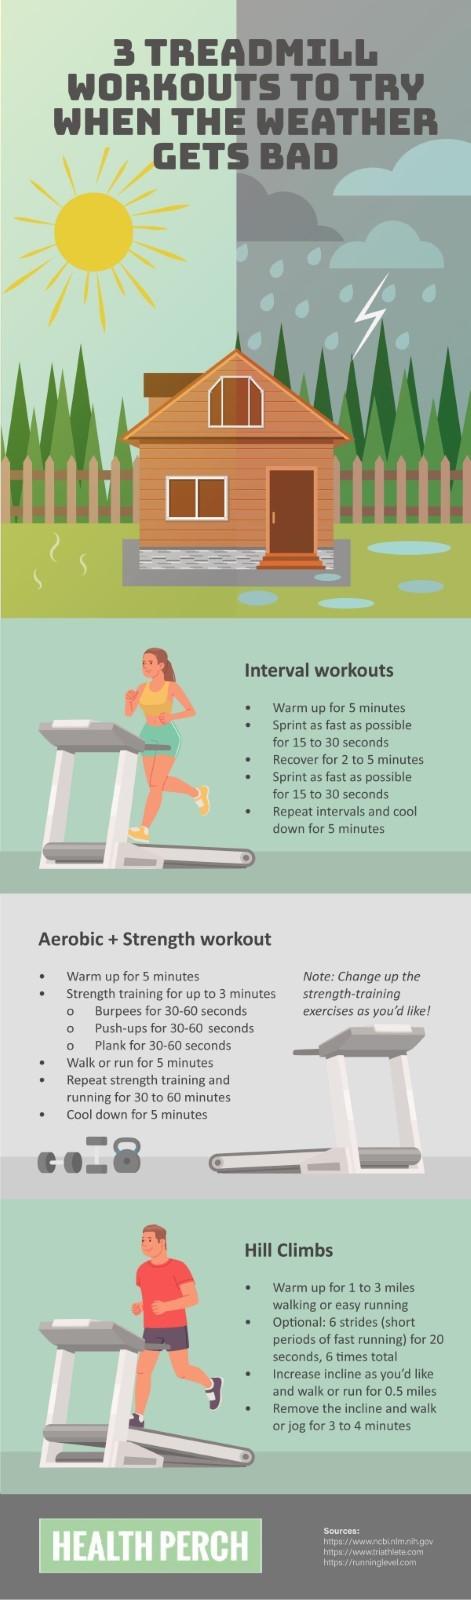 Enhancing Your Working Life: The Advantages Of A Regular Workout Routine